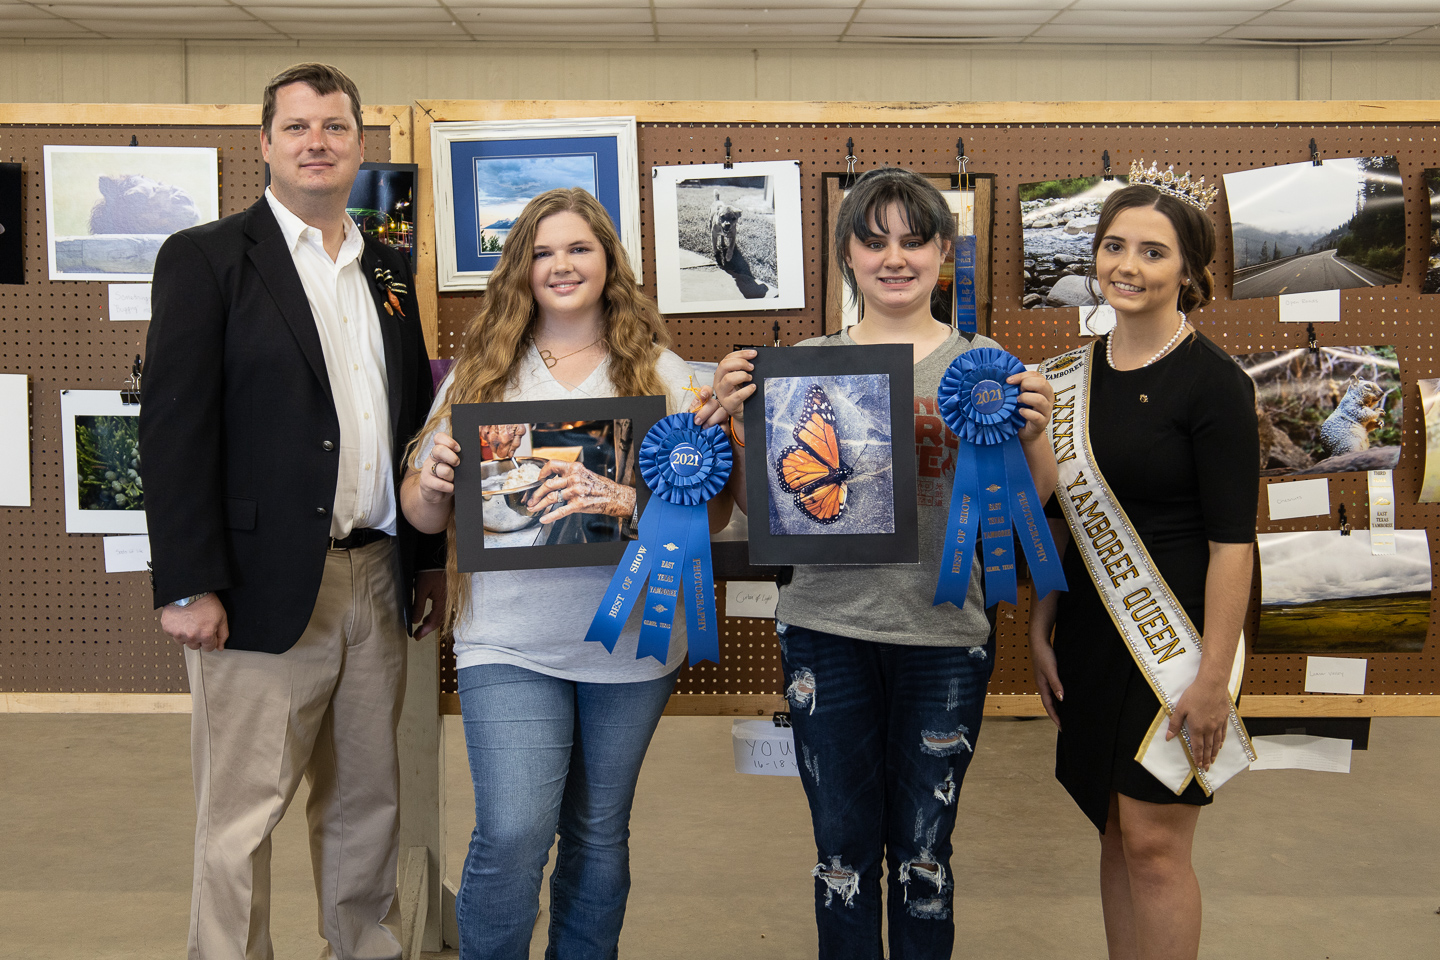 Queen Hannah Jean Henson with the art photography contest winners